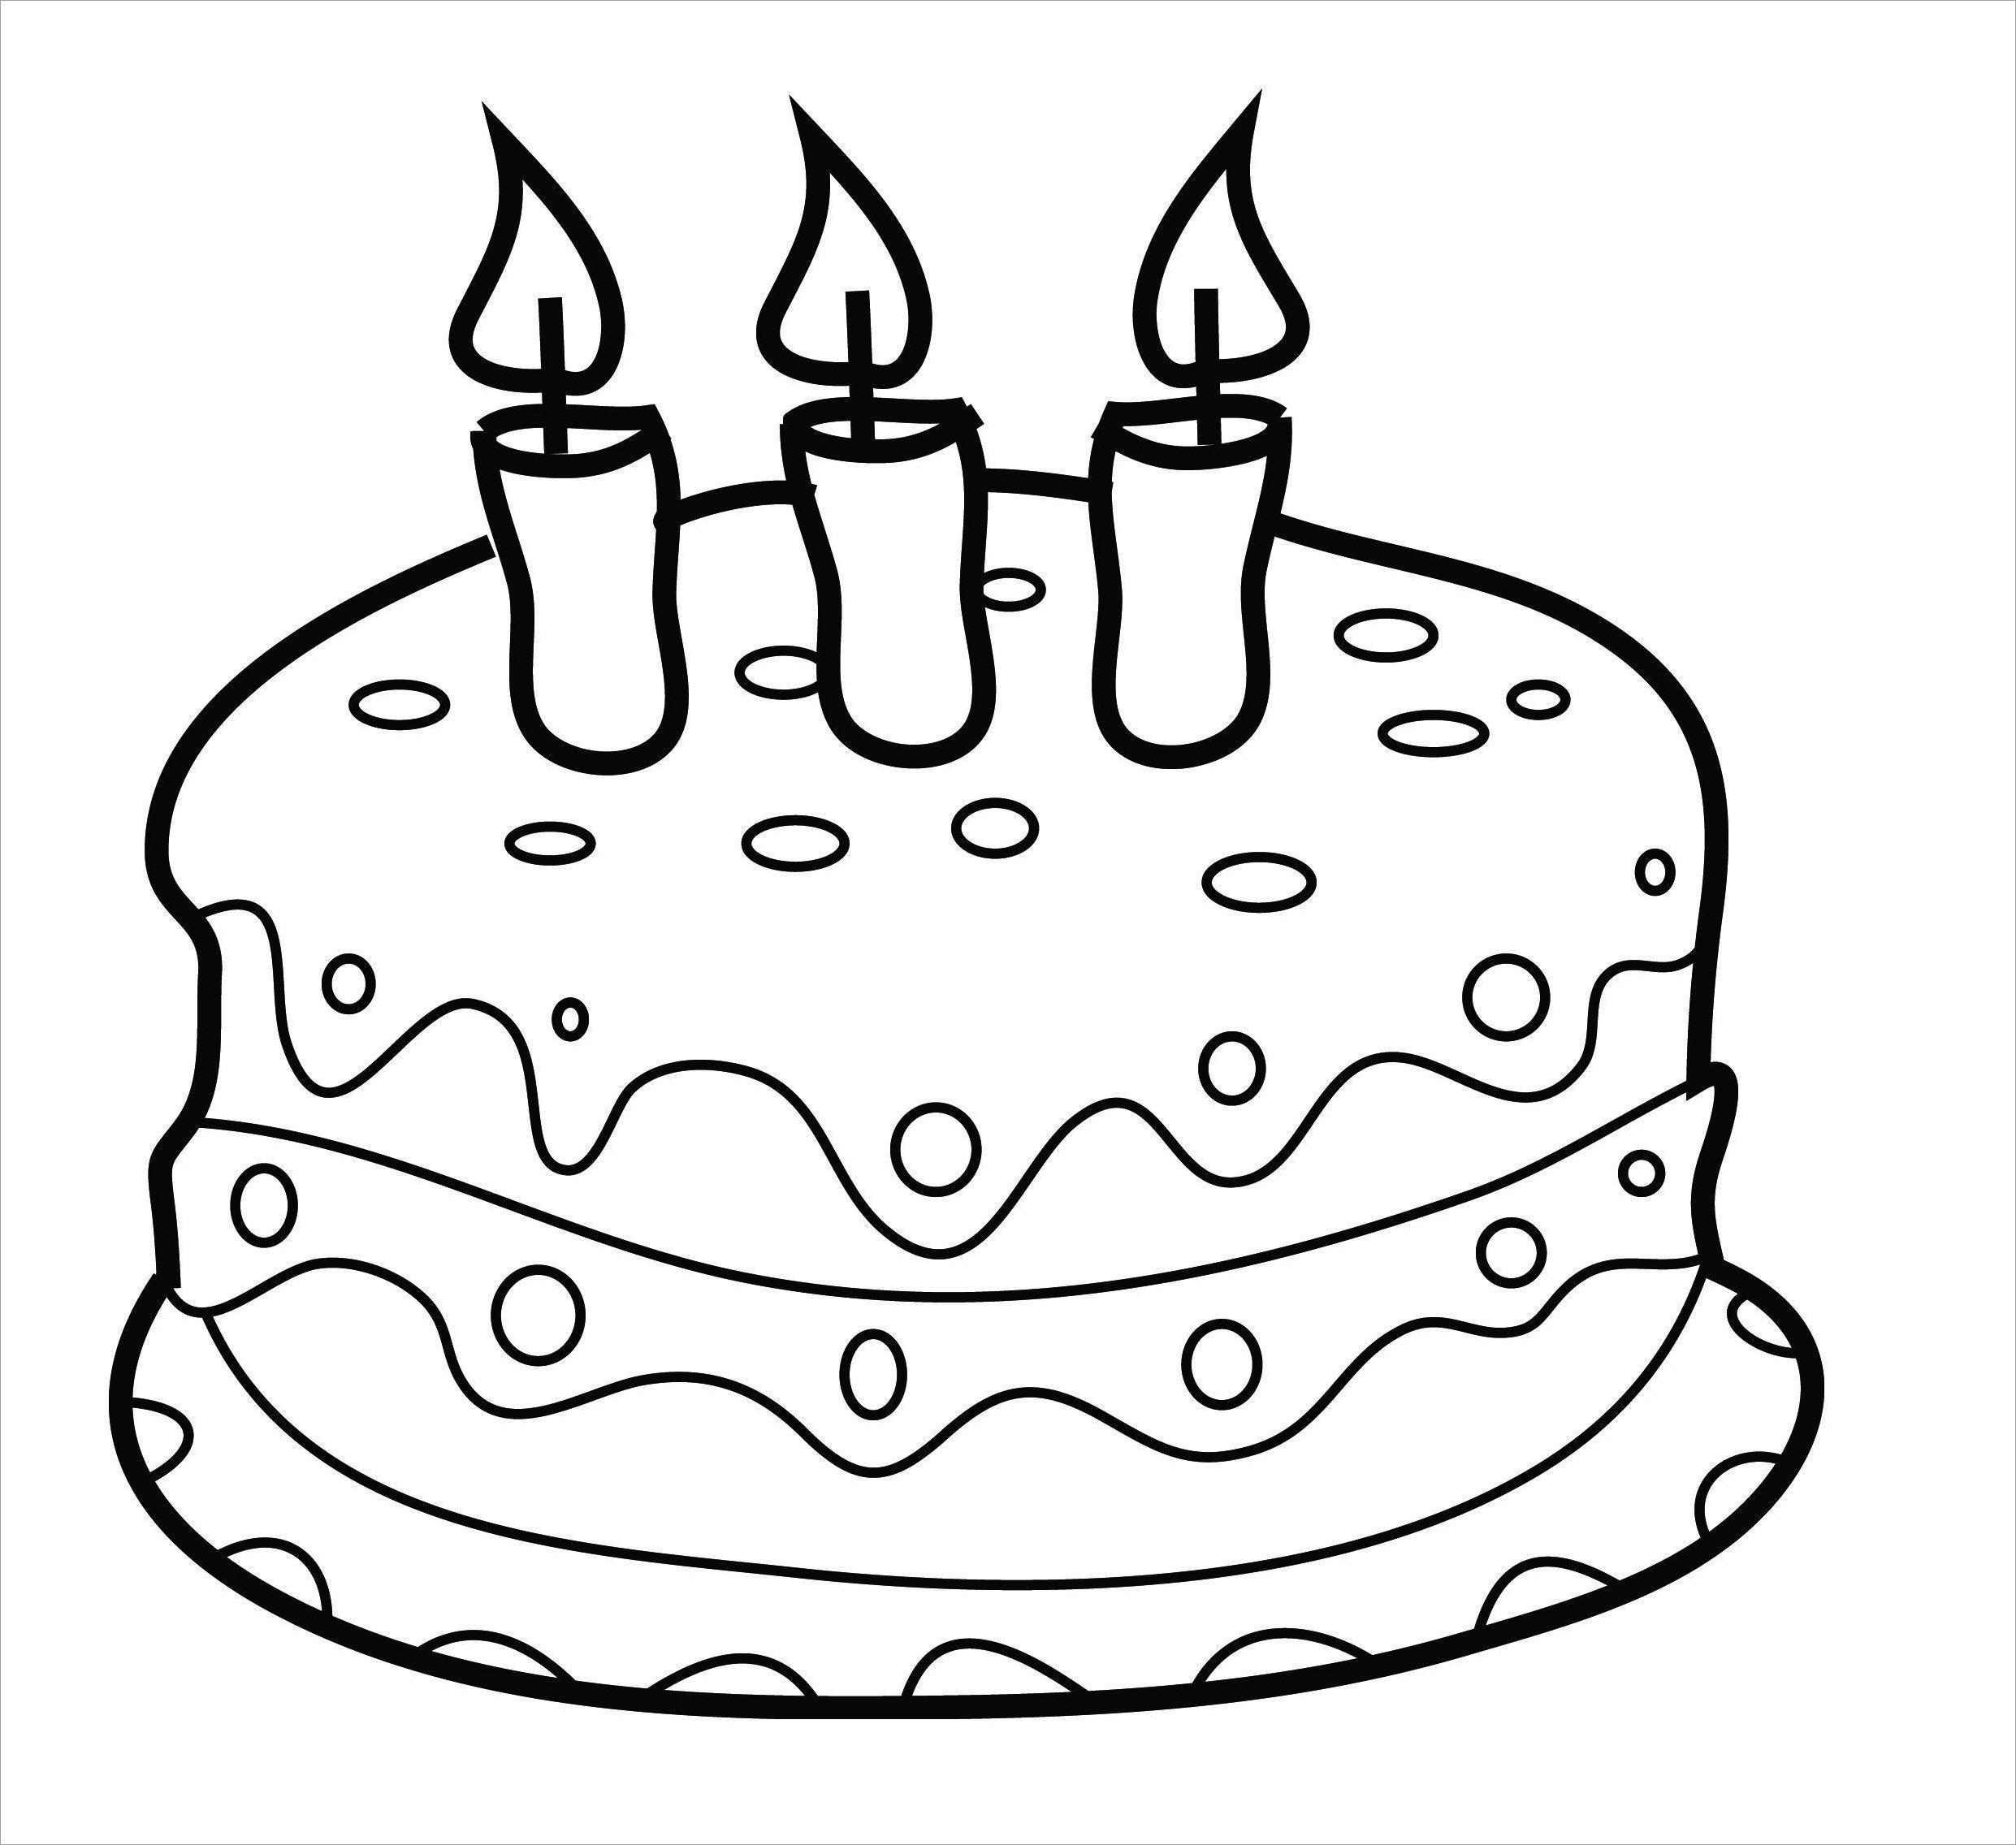 Coloring picture of birthday cake for kids